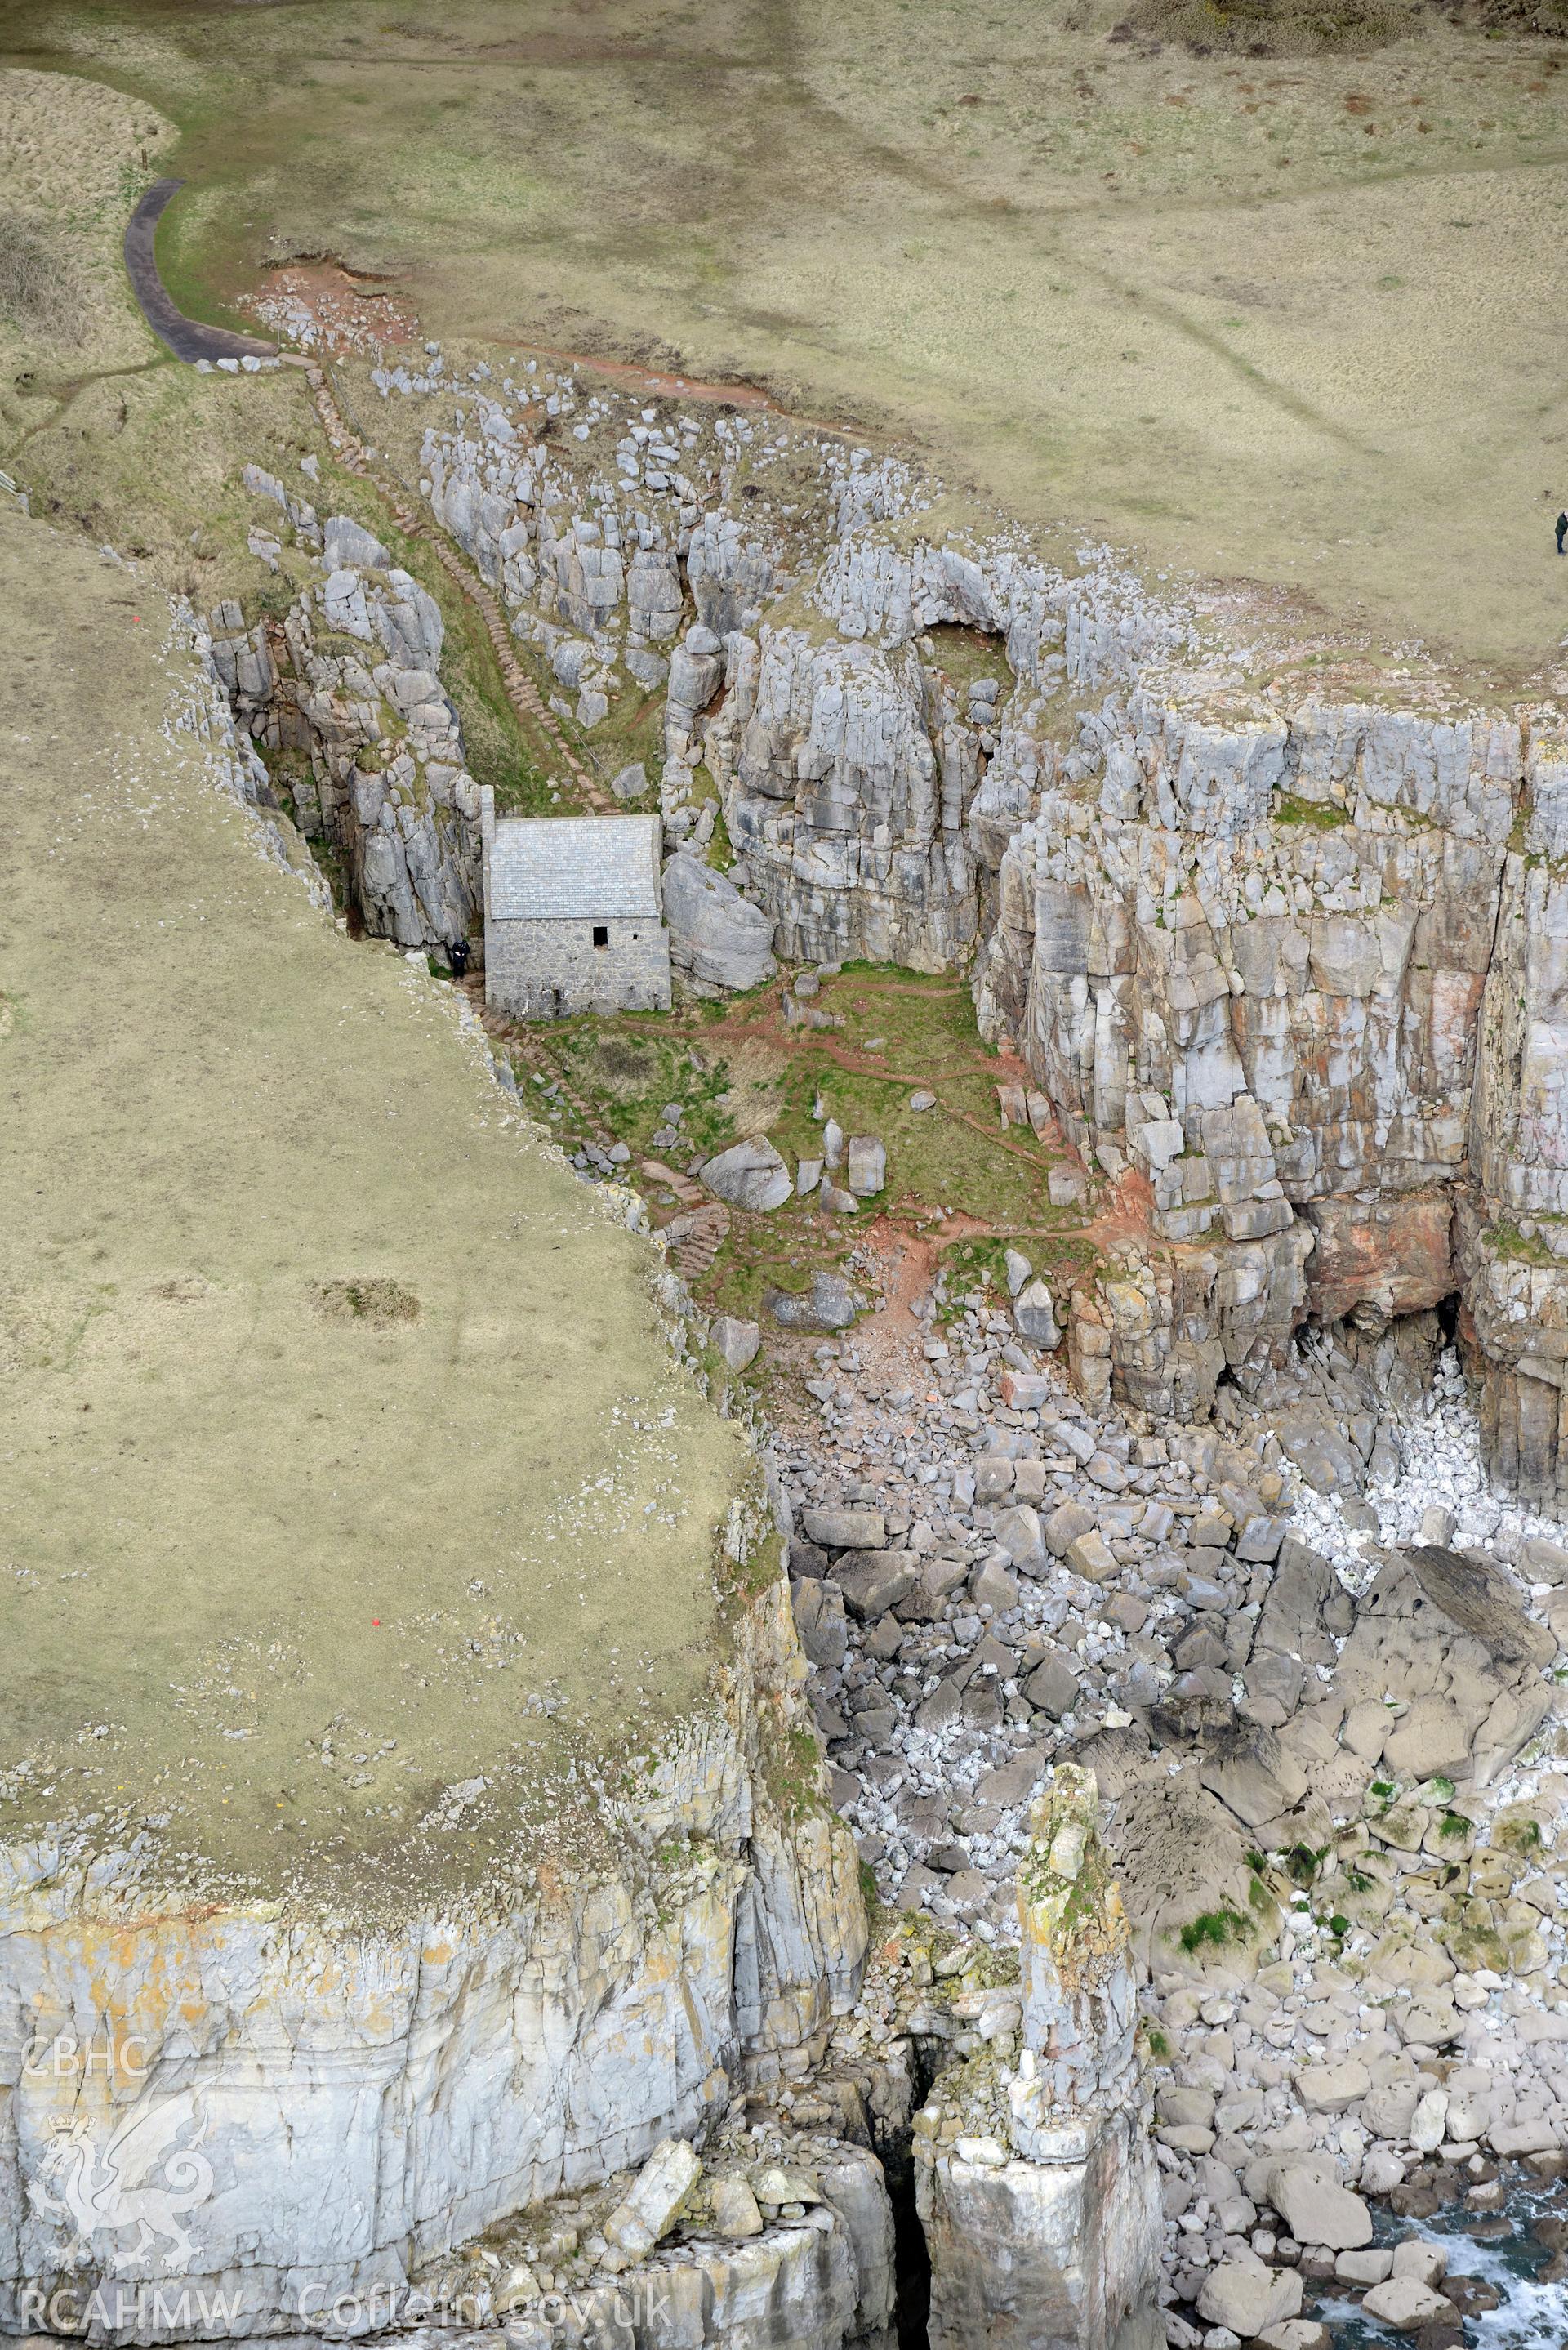 St Govan's Chapel. Baseline aerial reconnaissance survey for the CHERISH Project. ? Crown: CHERISH PROJECT 2018. Produced with EU funds through the Ireland Wales Co-operation Programme 2014-2020. All material made freely available through the Open Government Licence.